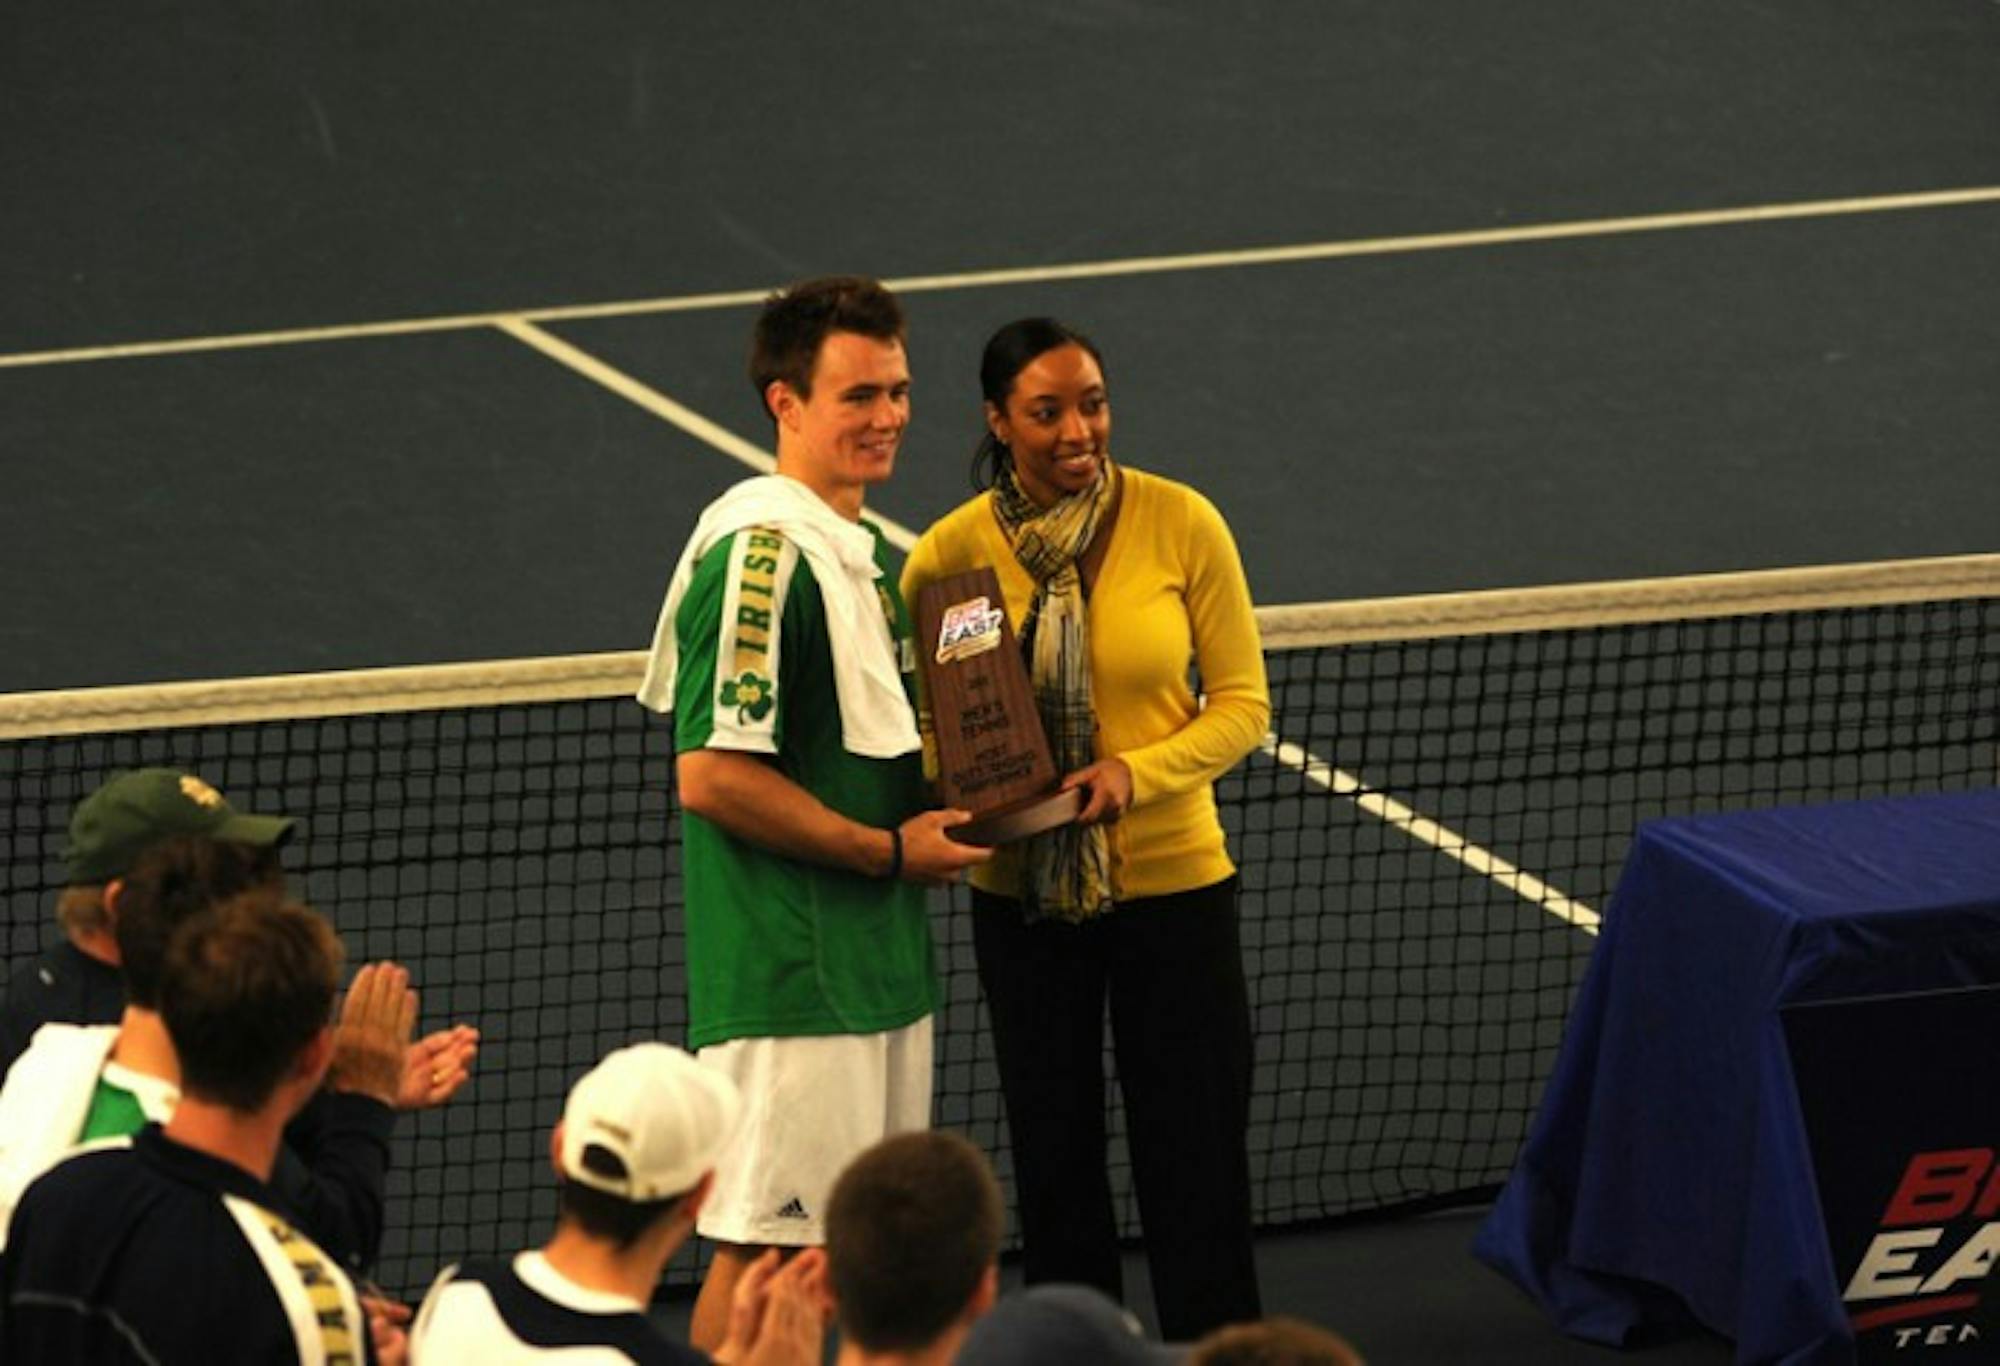 Irish senior Greg Andrews accepts the award for Most Outstanding Preformer at the Big East conference championship on Apr. 21, 2013. Andrews lost in both singles and doubles on Wednesday at Illinois.